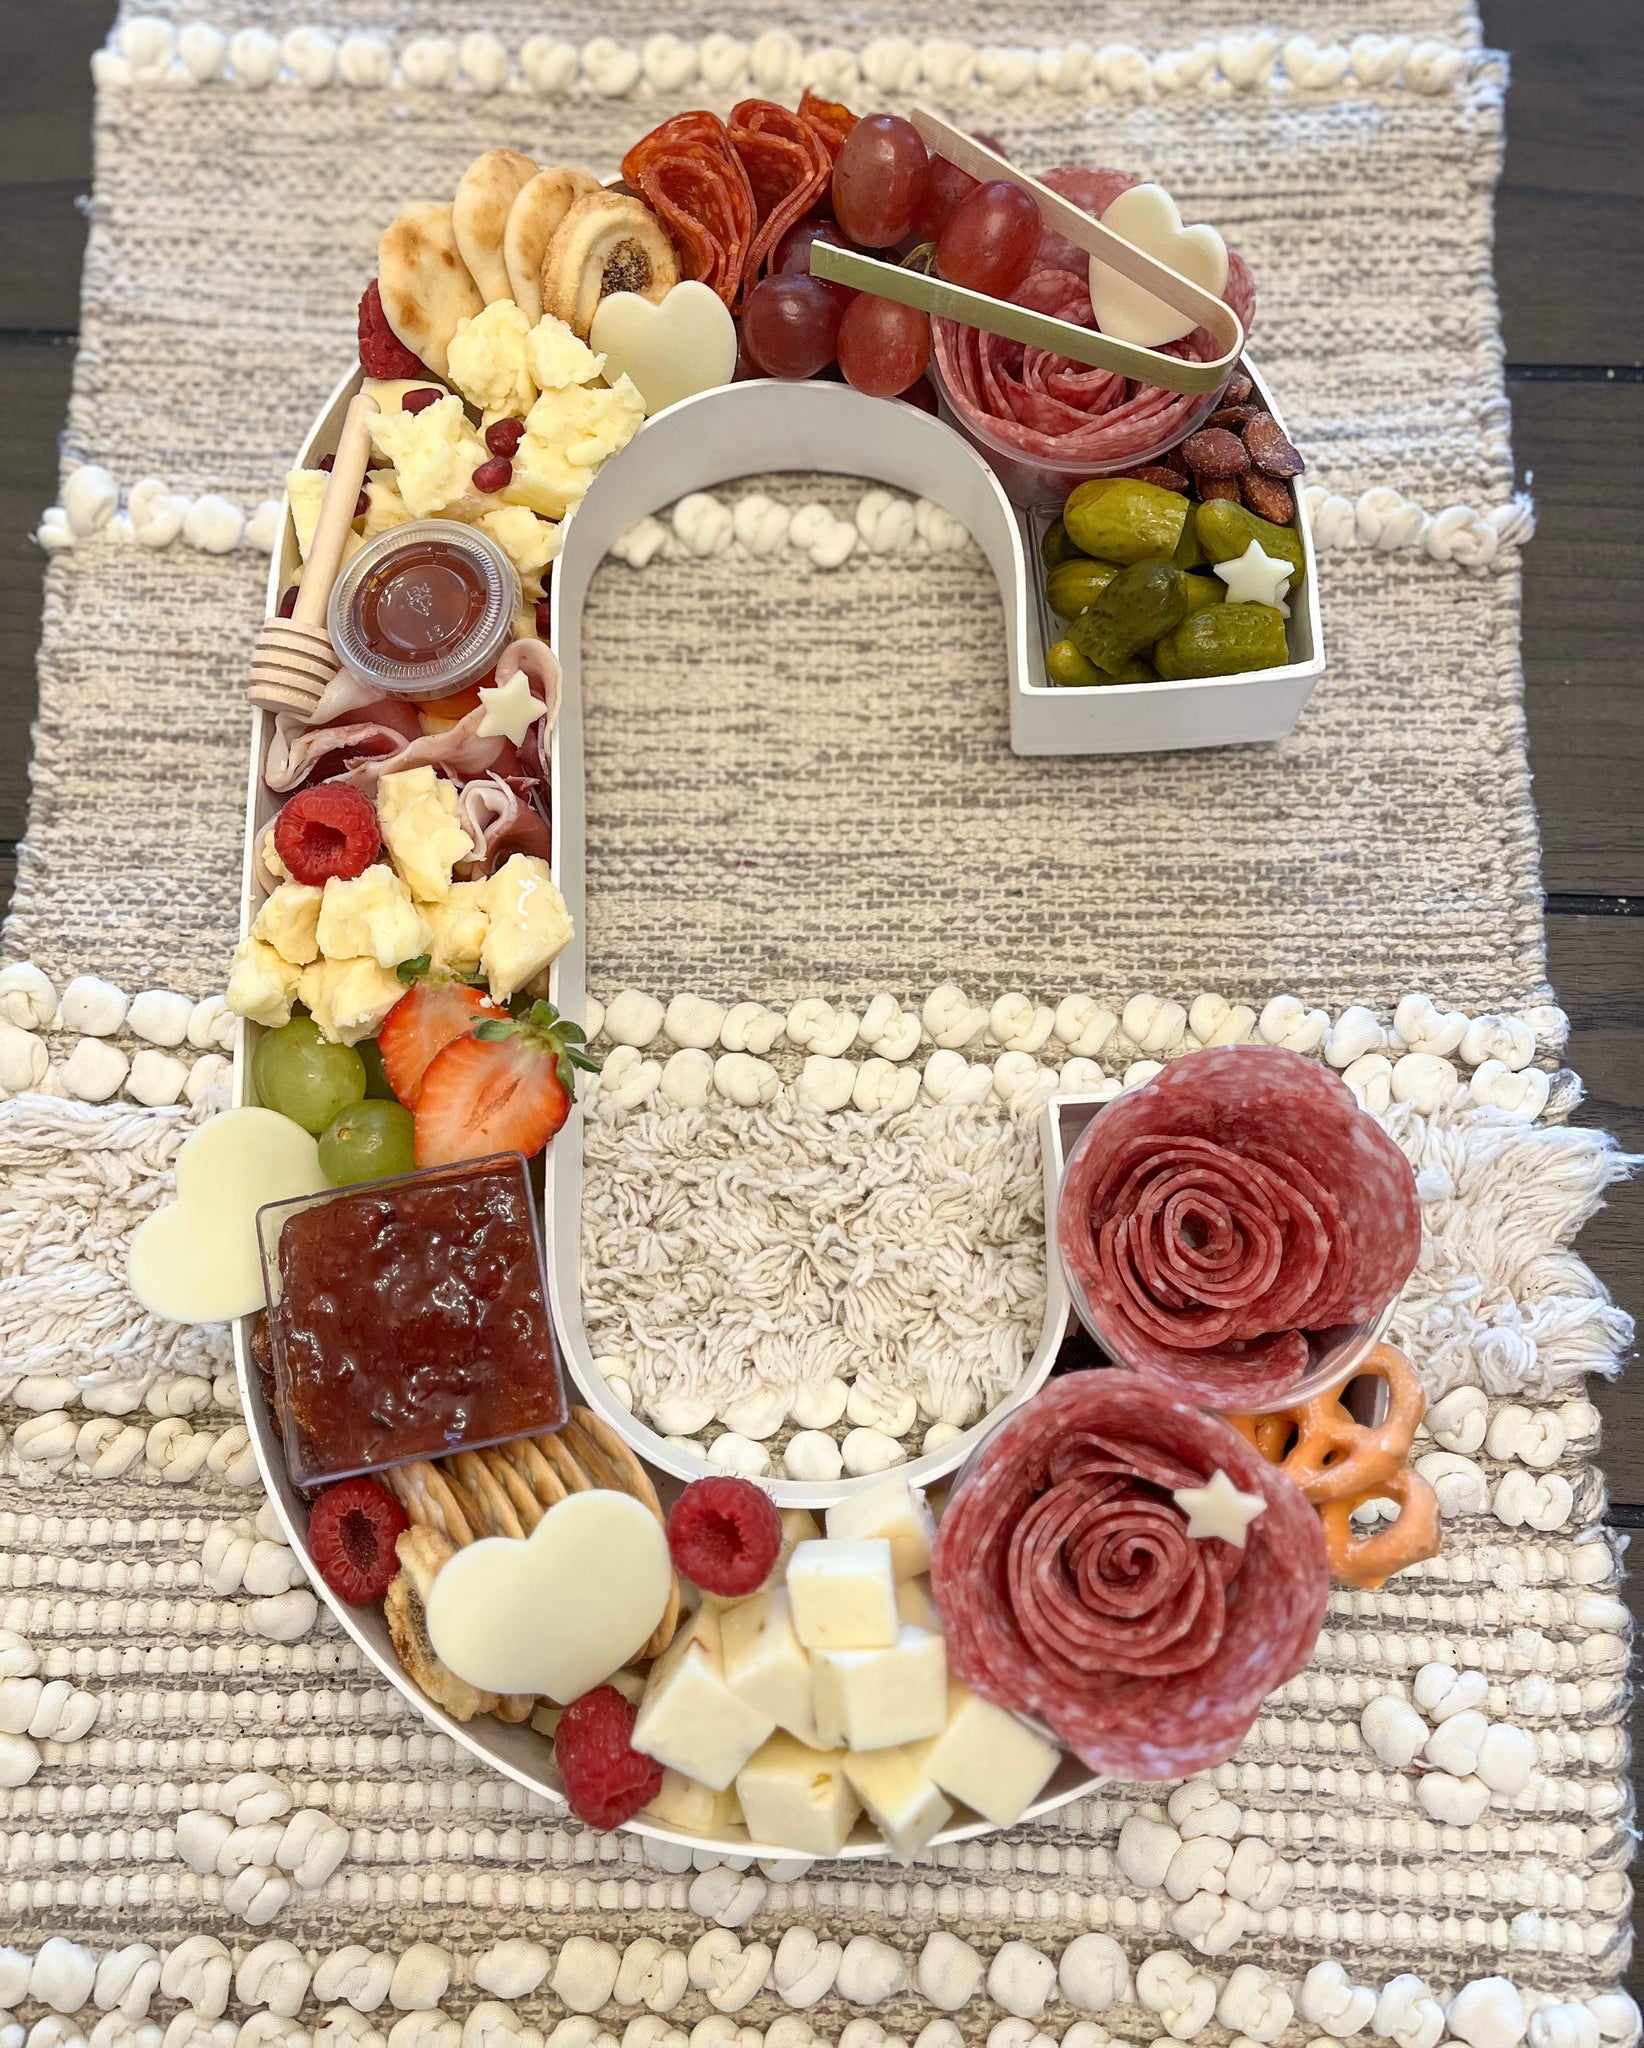 Charcuterie Letters – Green Leaf Charcuterie Boards